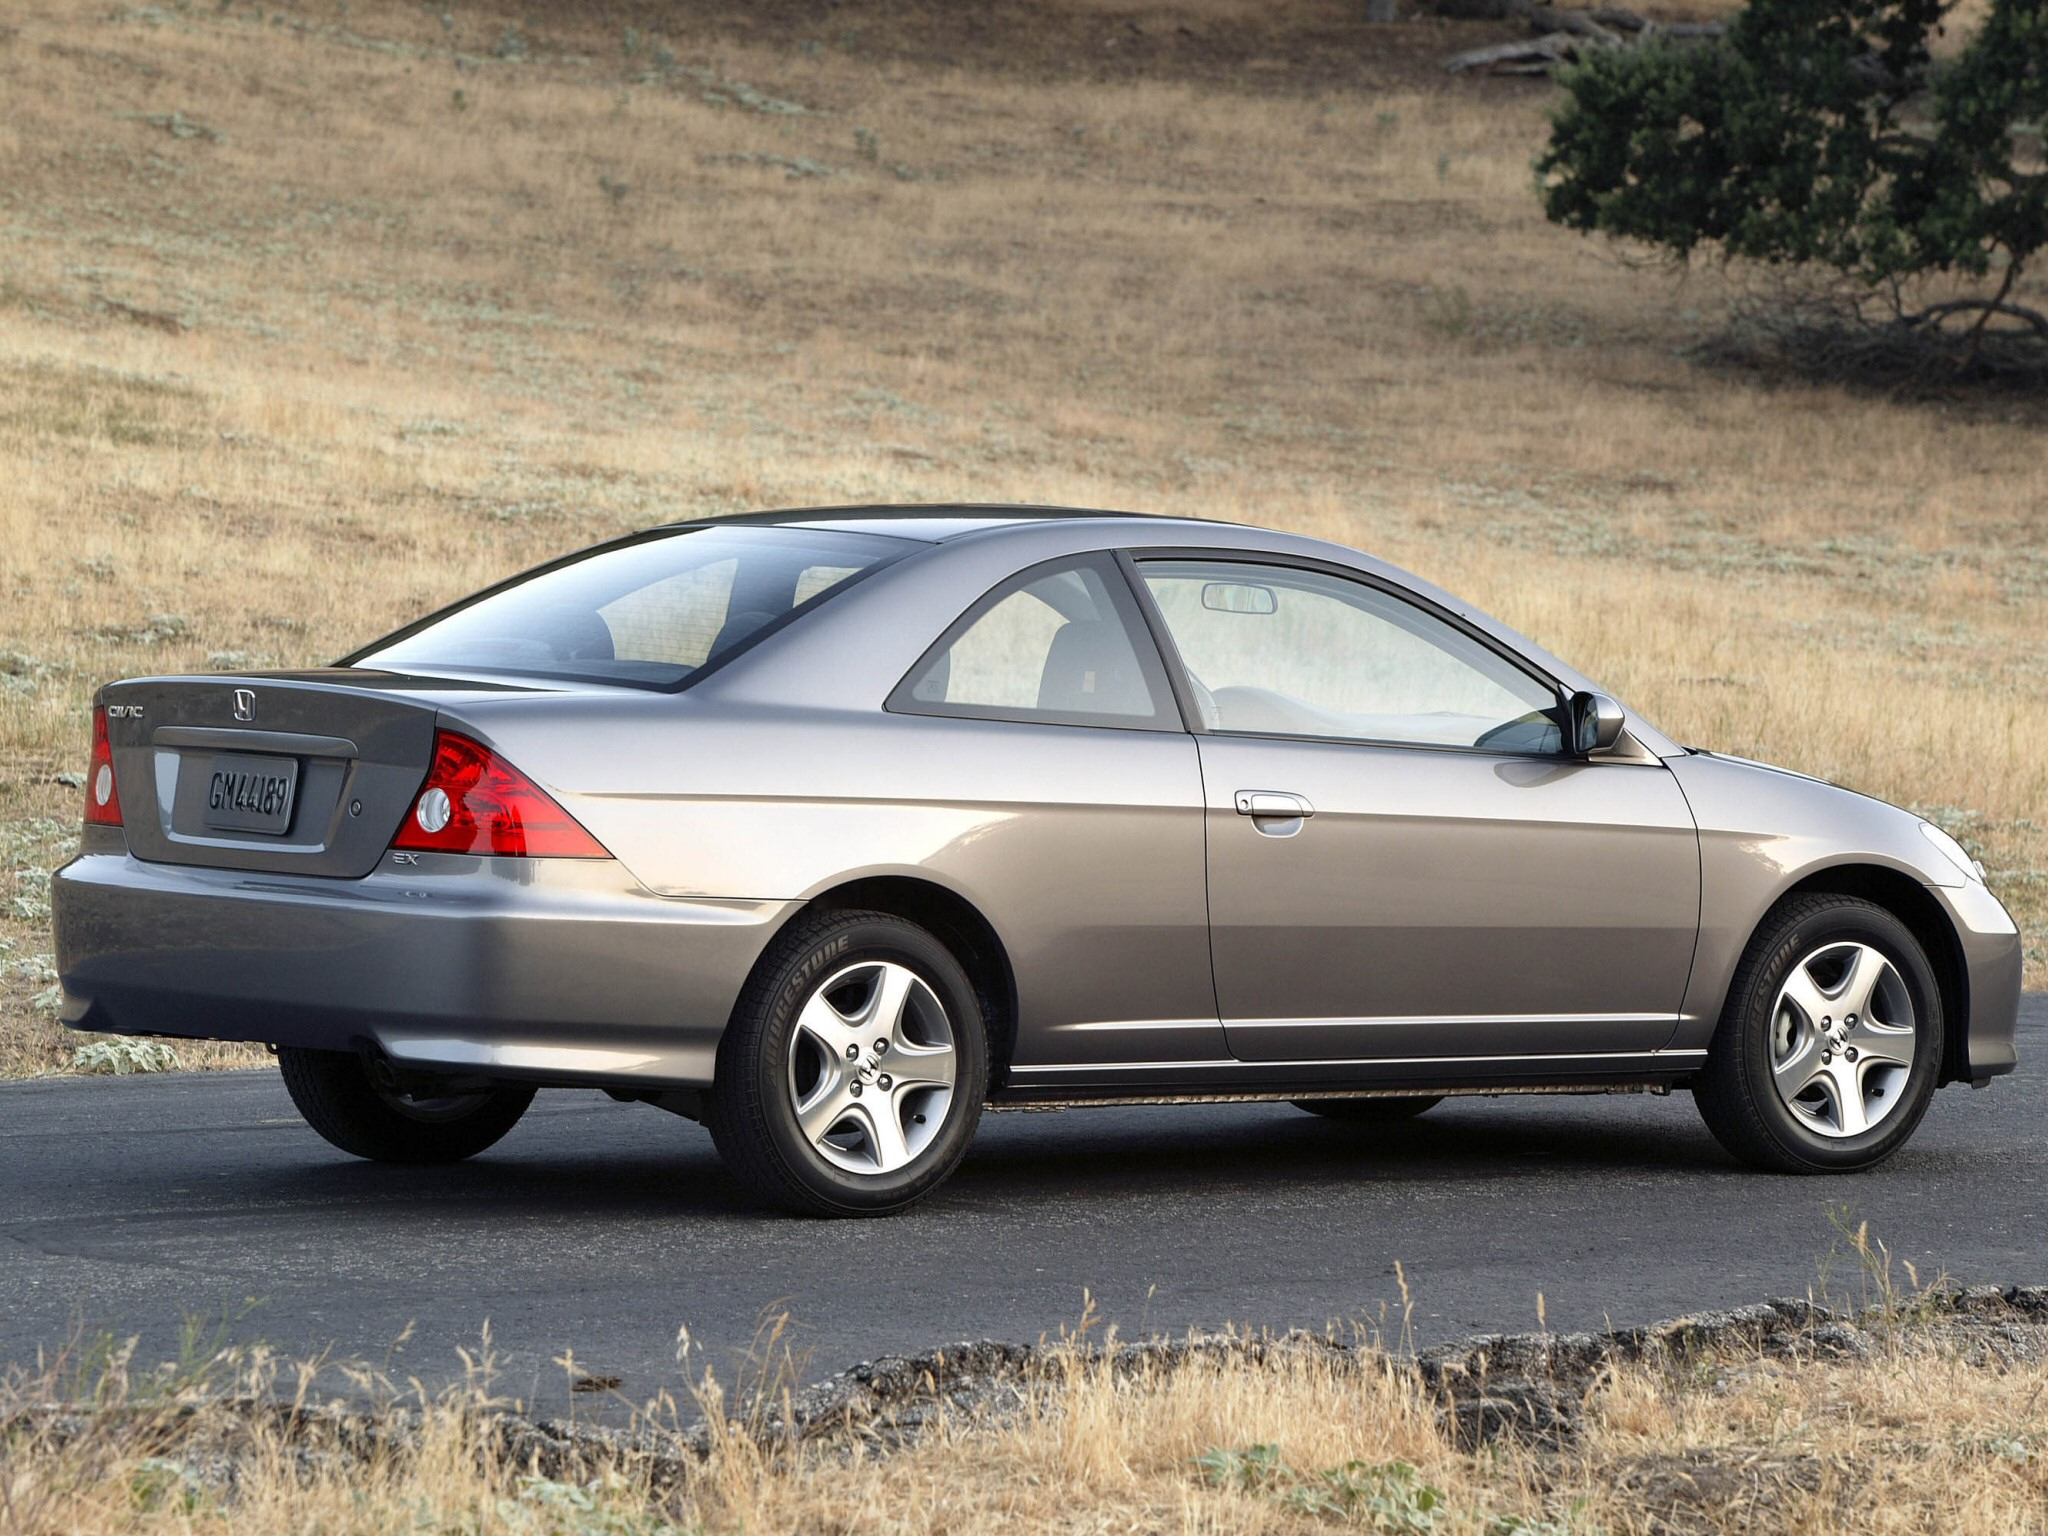 Car in pictures car photo gallery » Honda Civic Coupe